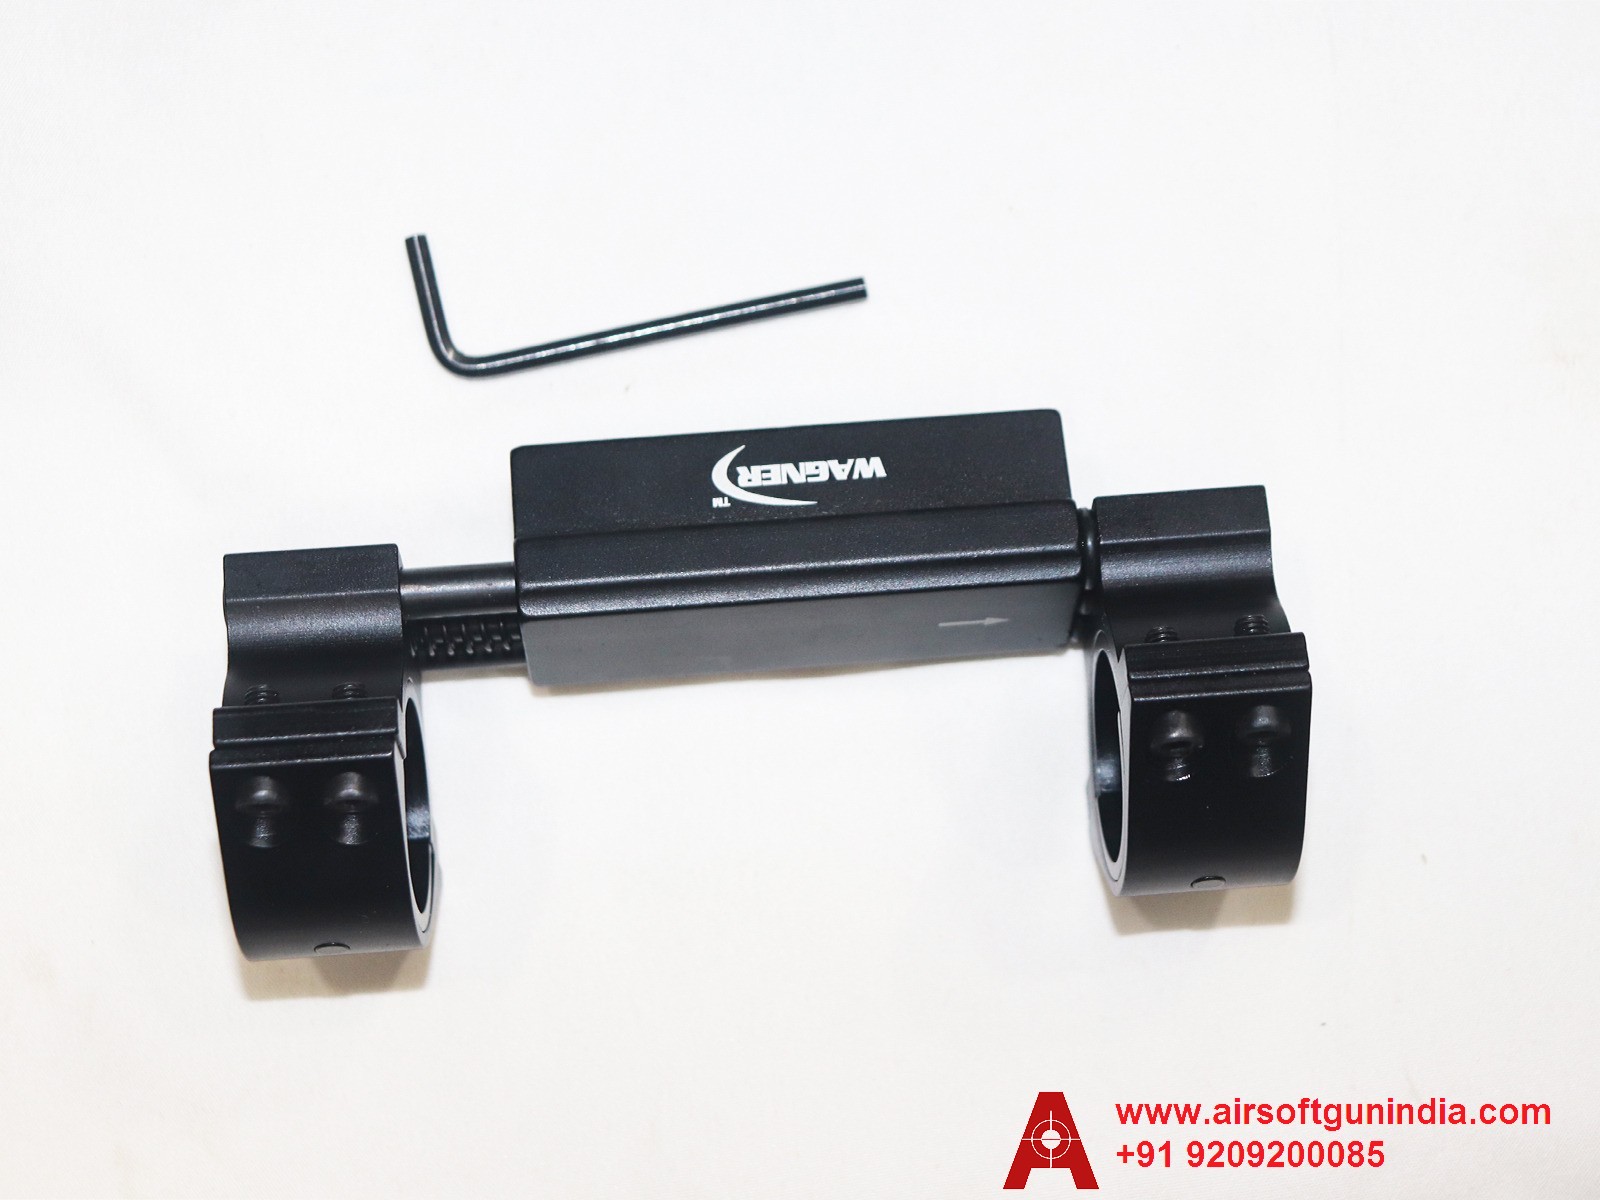 WAGNER Zero Recoil Pro Mount By Airsoft Gun India